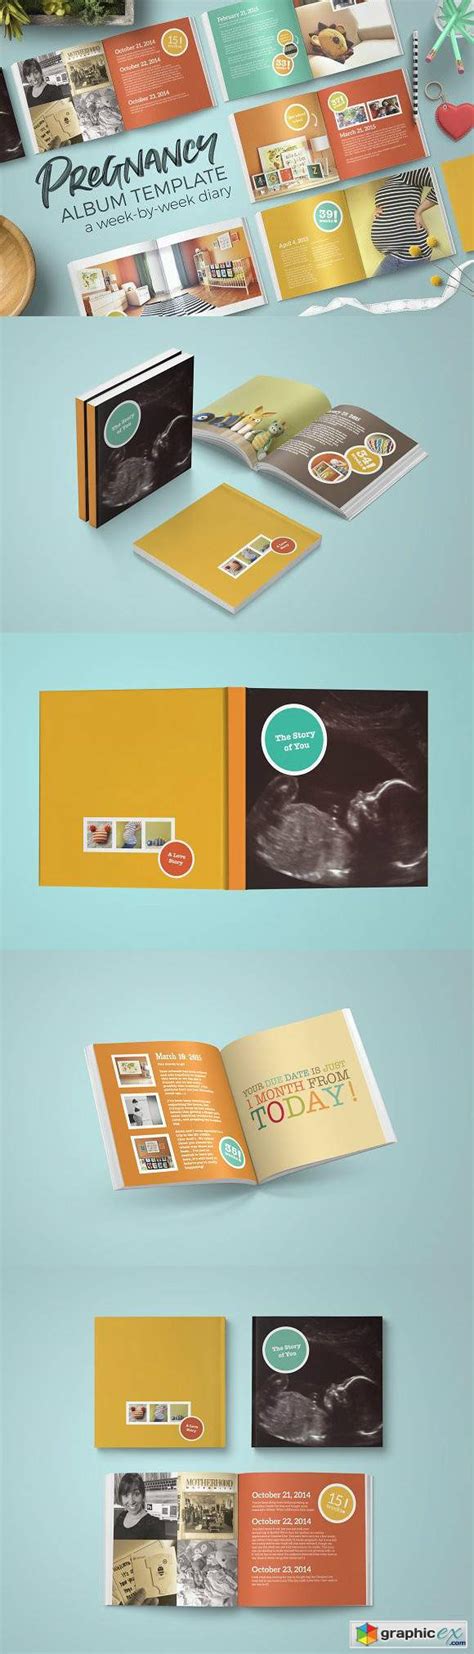 pregnancy album and diary template free download vector